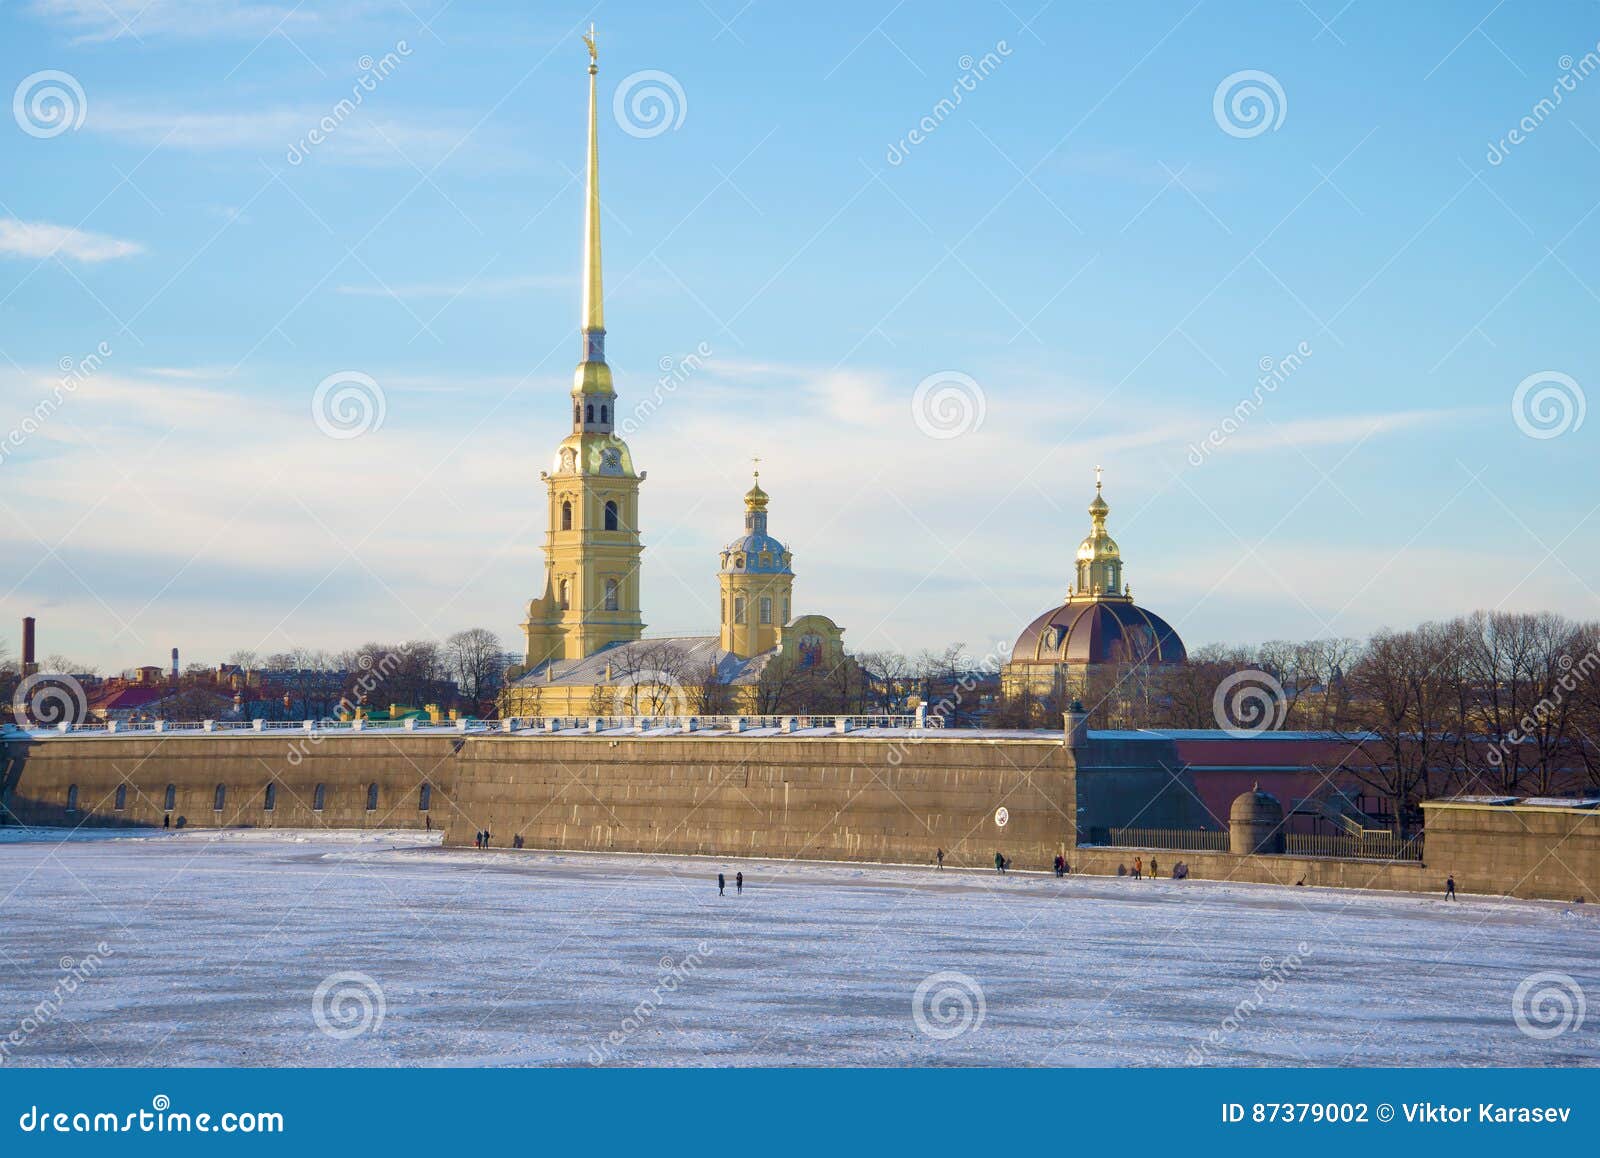 peter and paul cathedral in peter and paul fortress in january day. saint petersburg, russia